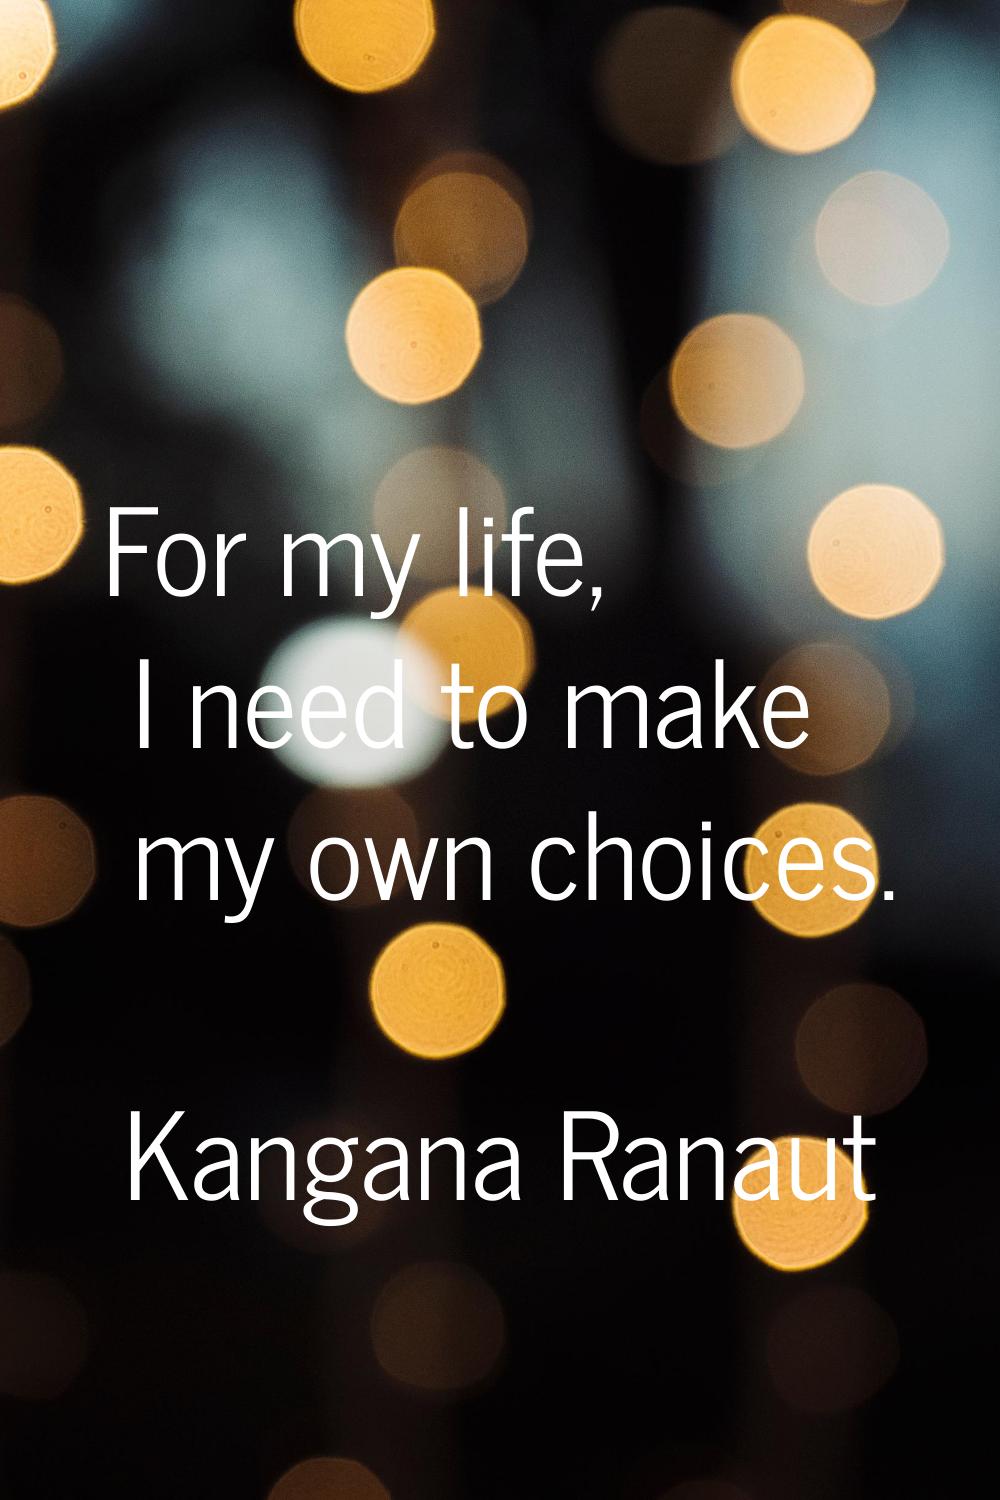 For my life, I need to make my own choices.